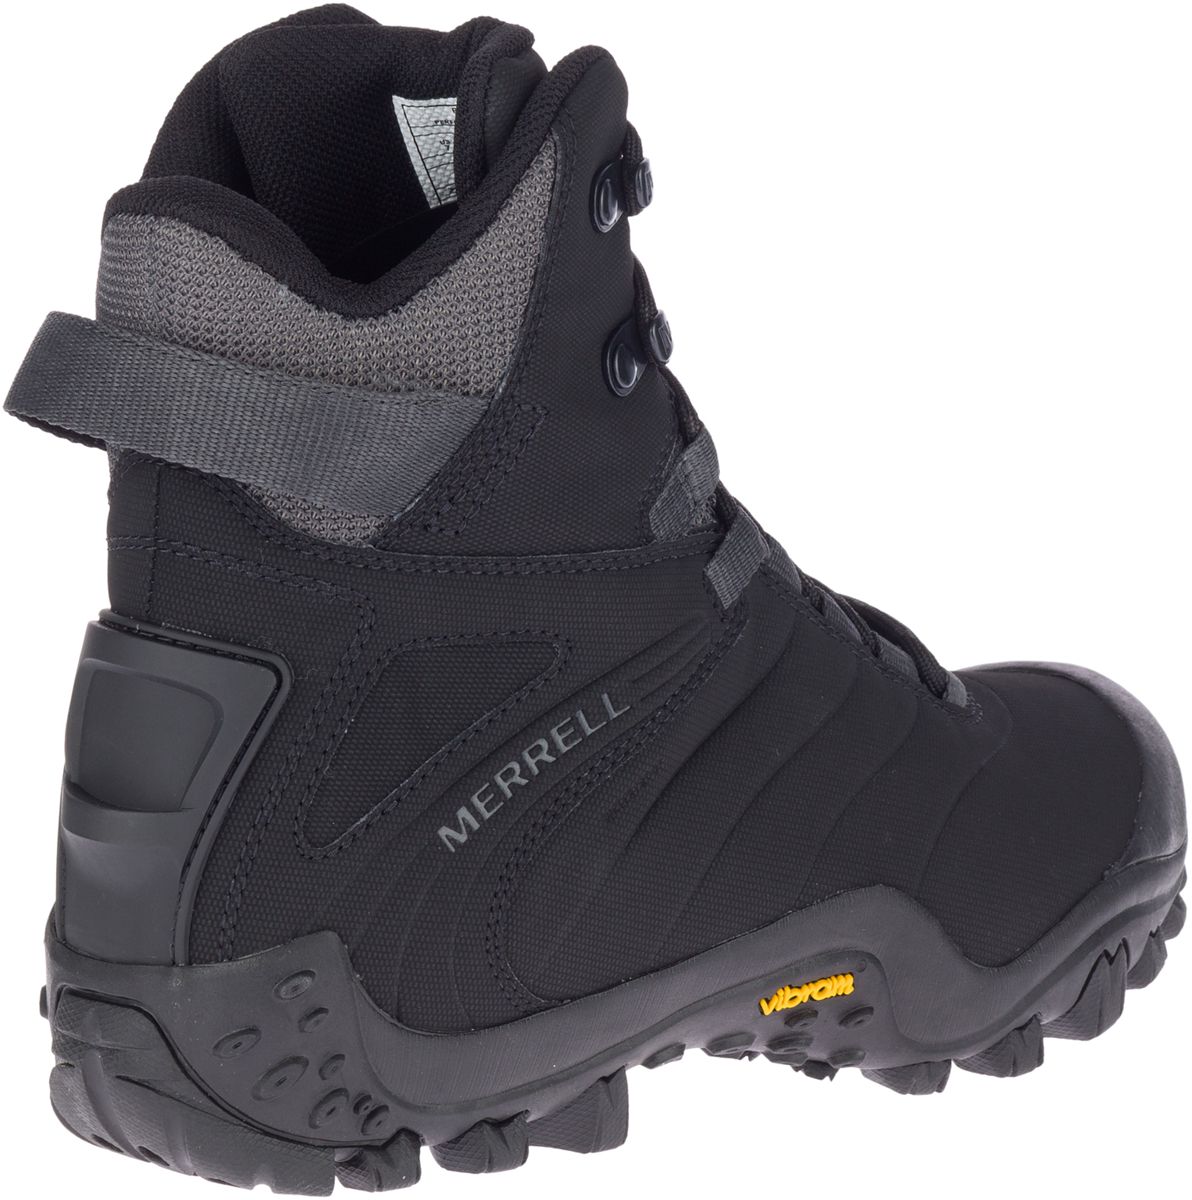 Chameleon Thermo 8 Tall Waterproof, Black/Rock, dynamic 8